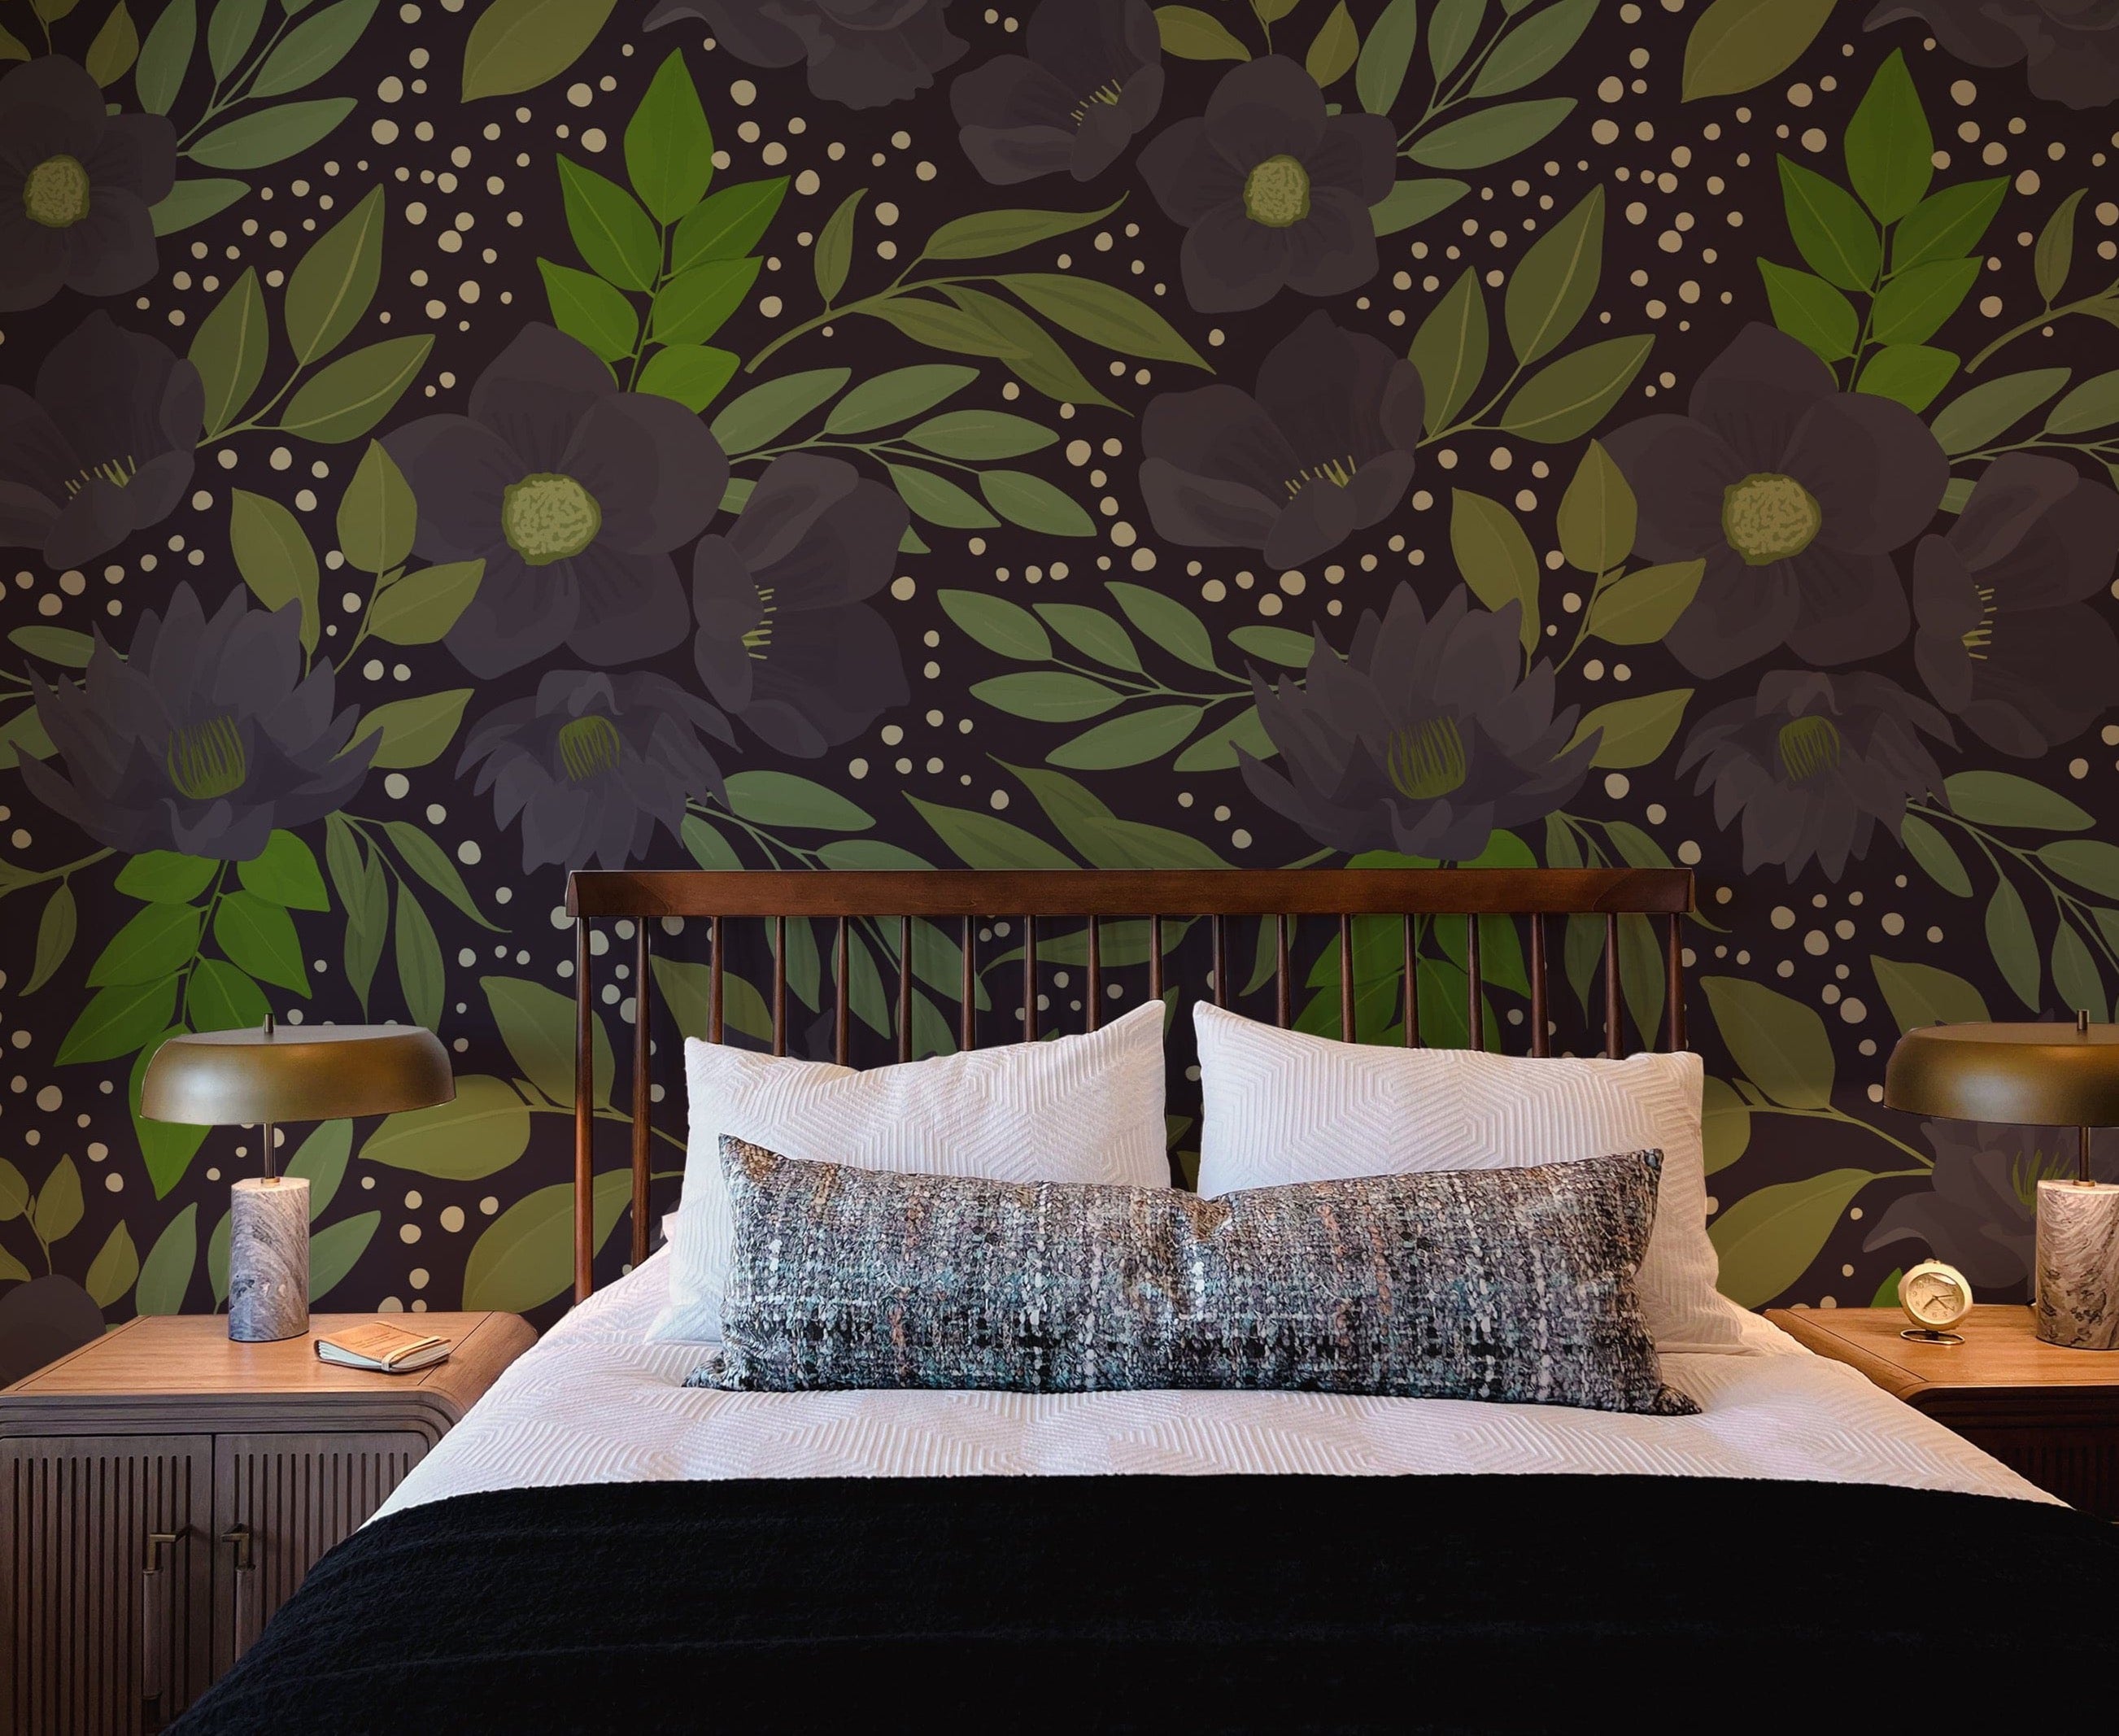 Modern bedroom with a striking floral wallpaper featuring large dark flowers and green foliage on a dark background, a wooden bed with white bedding and a black blanket, white and patterned pillows, wooden nightstands with green-shaded lamps, and small decorative items